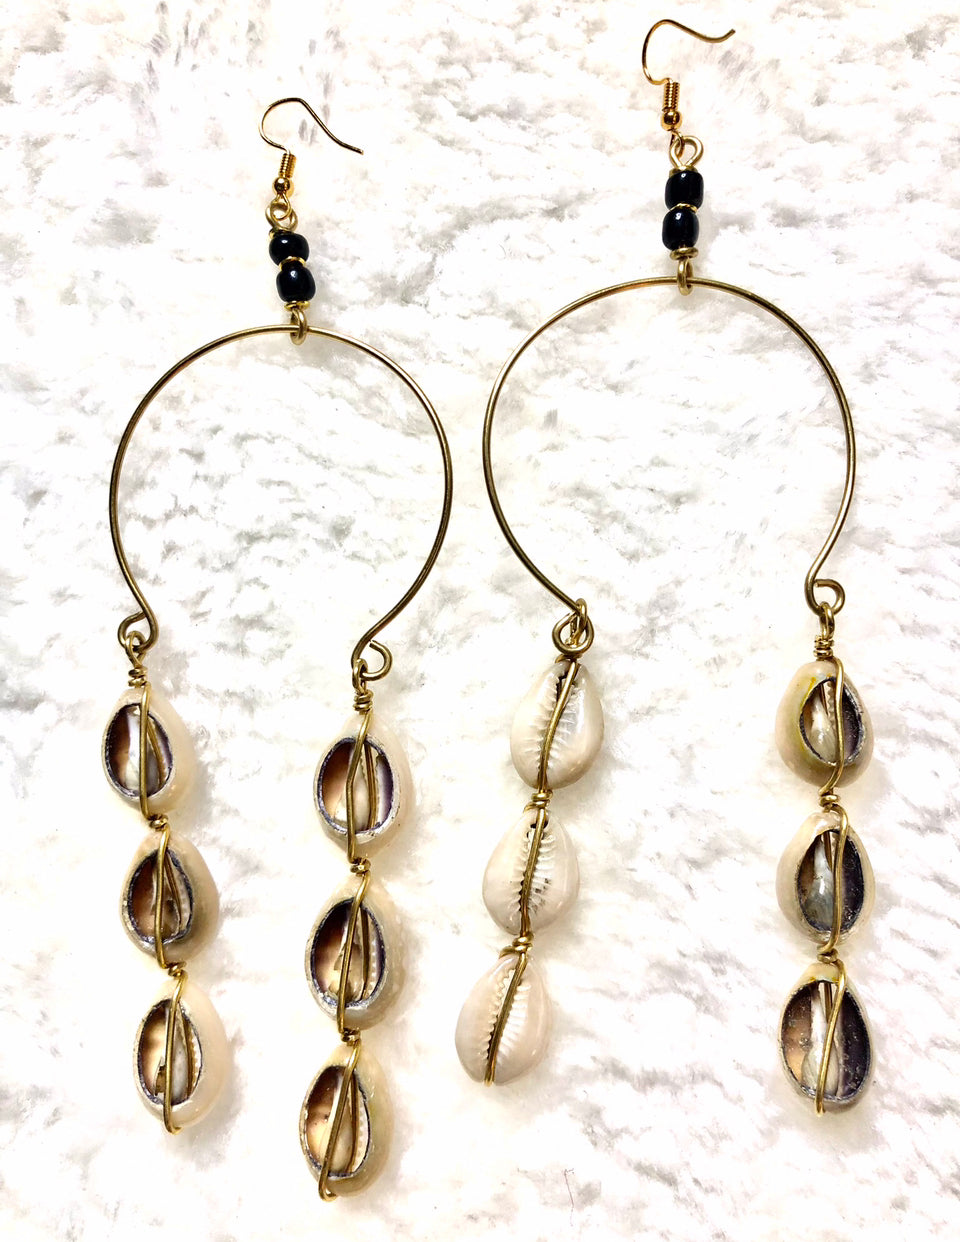 "Brass And Cowries" Earrings